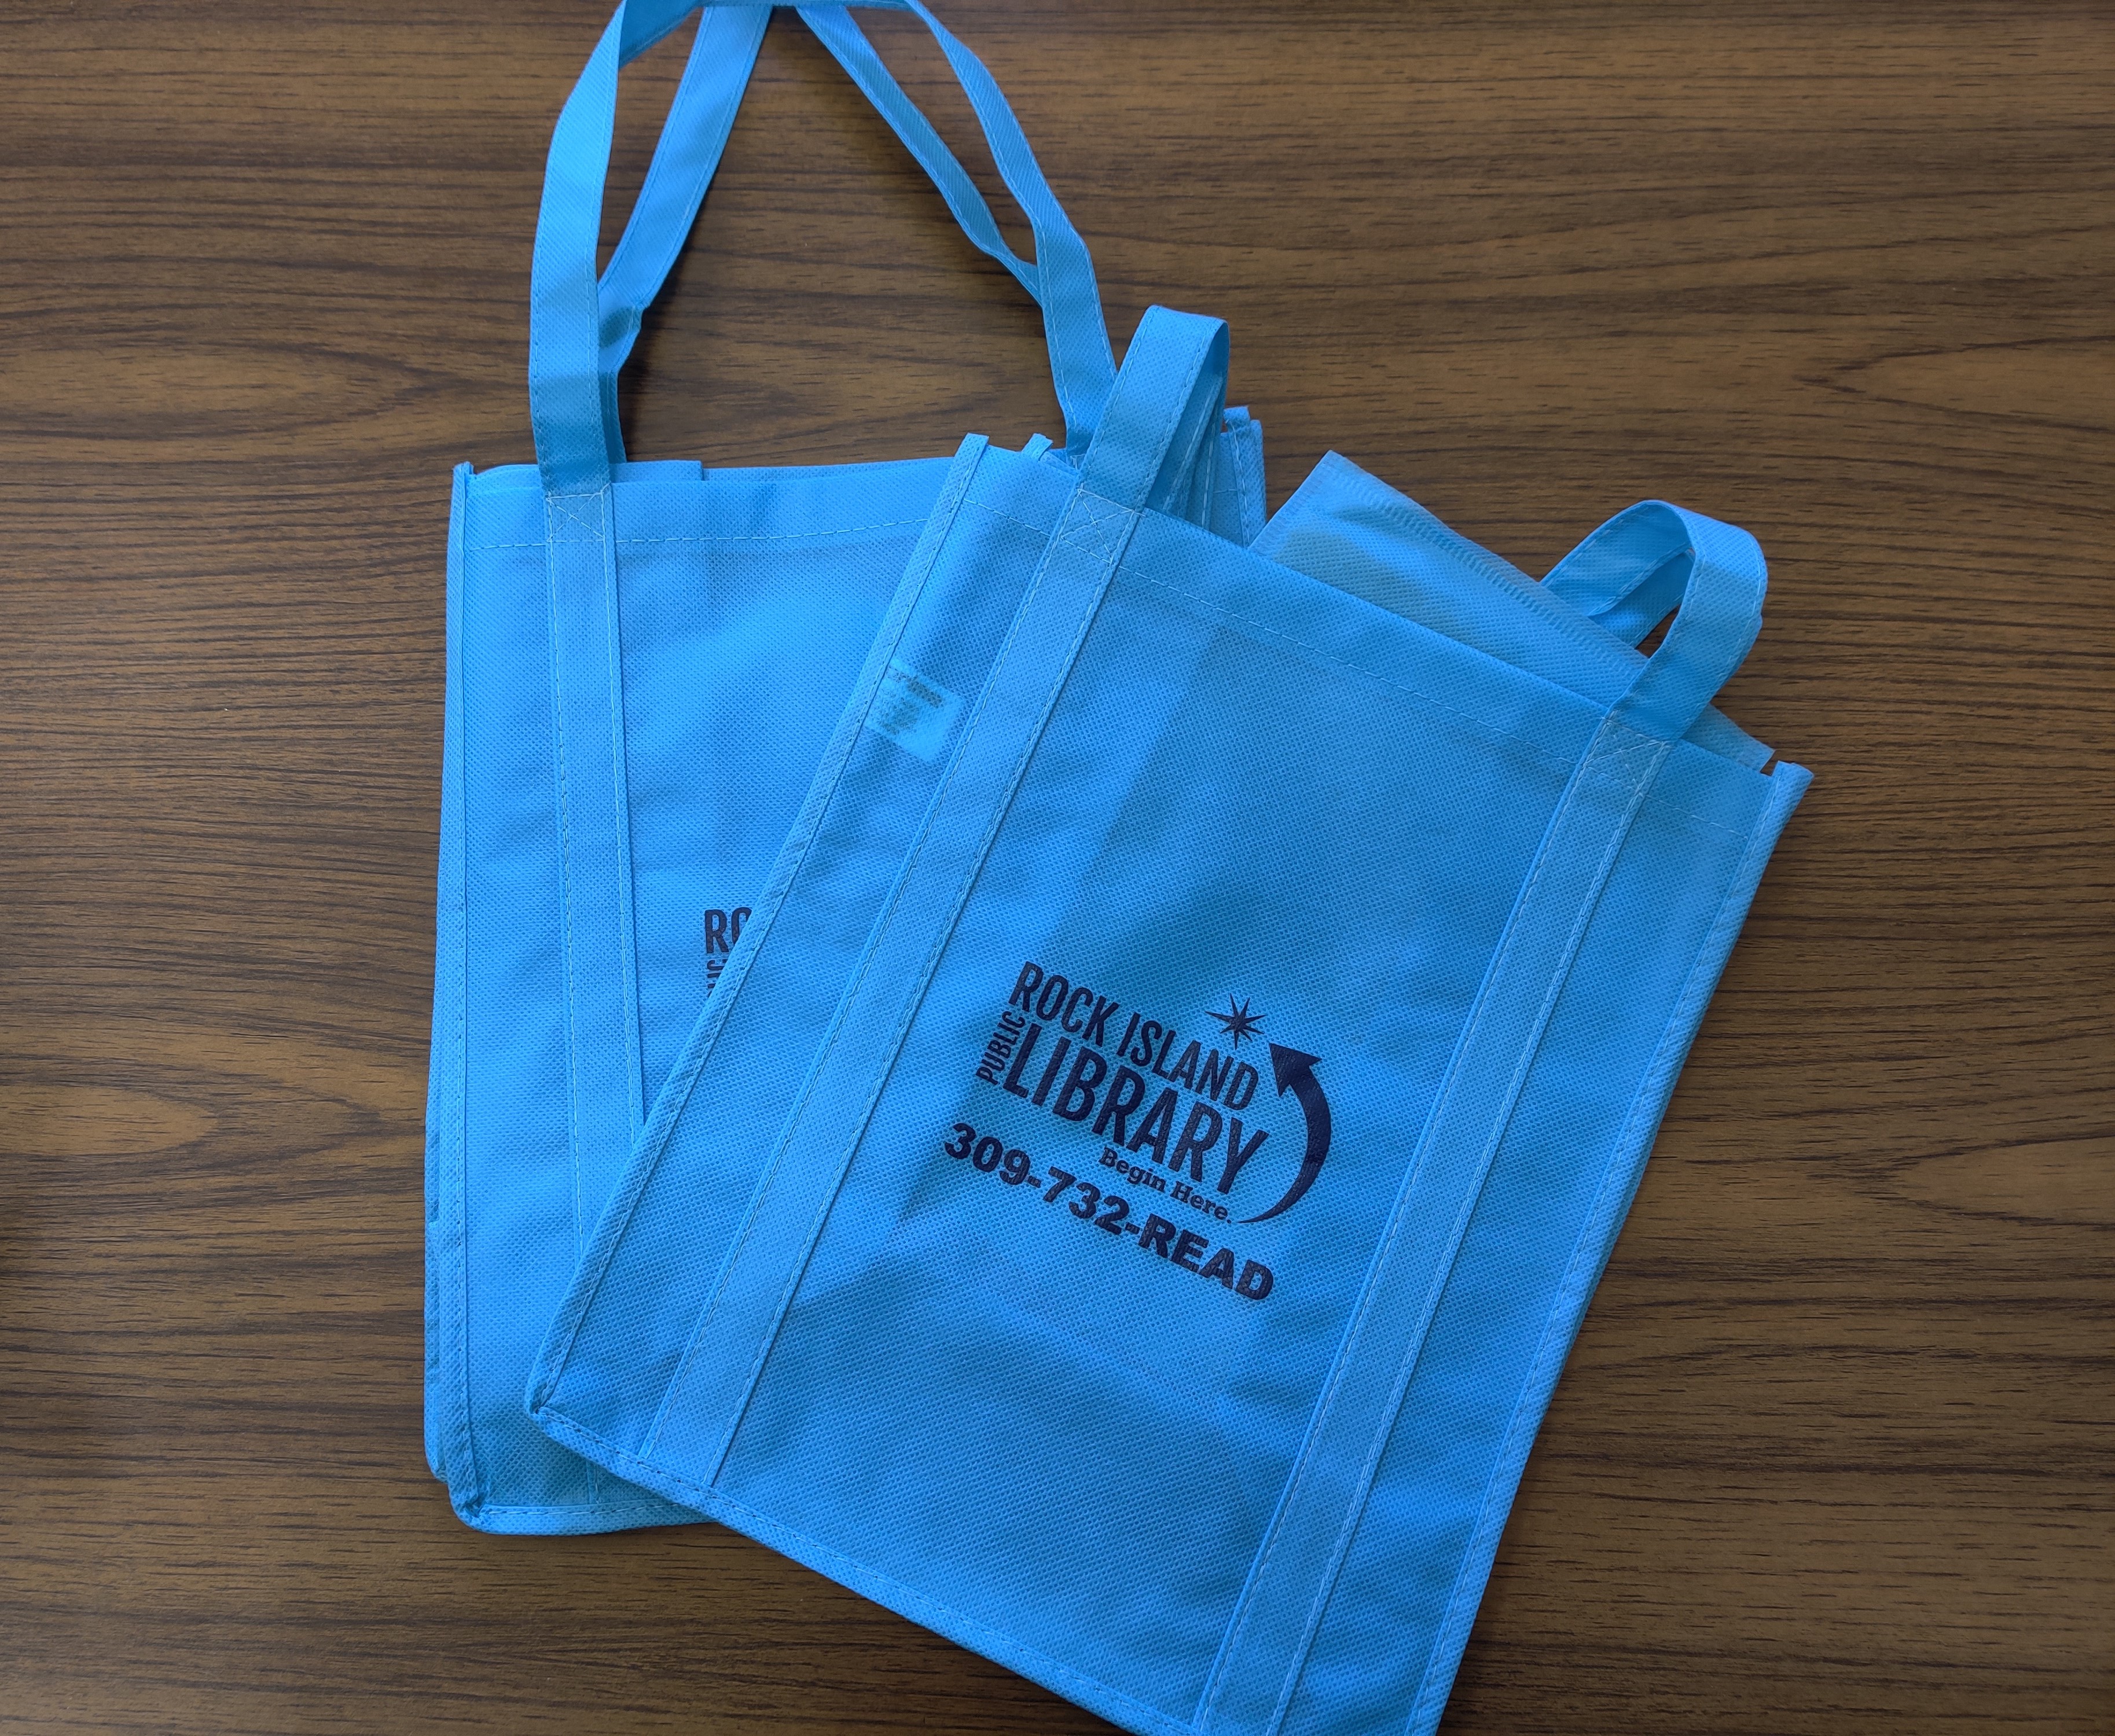 Library bags_light blue with navy blue lettering 